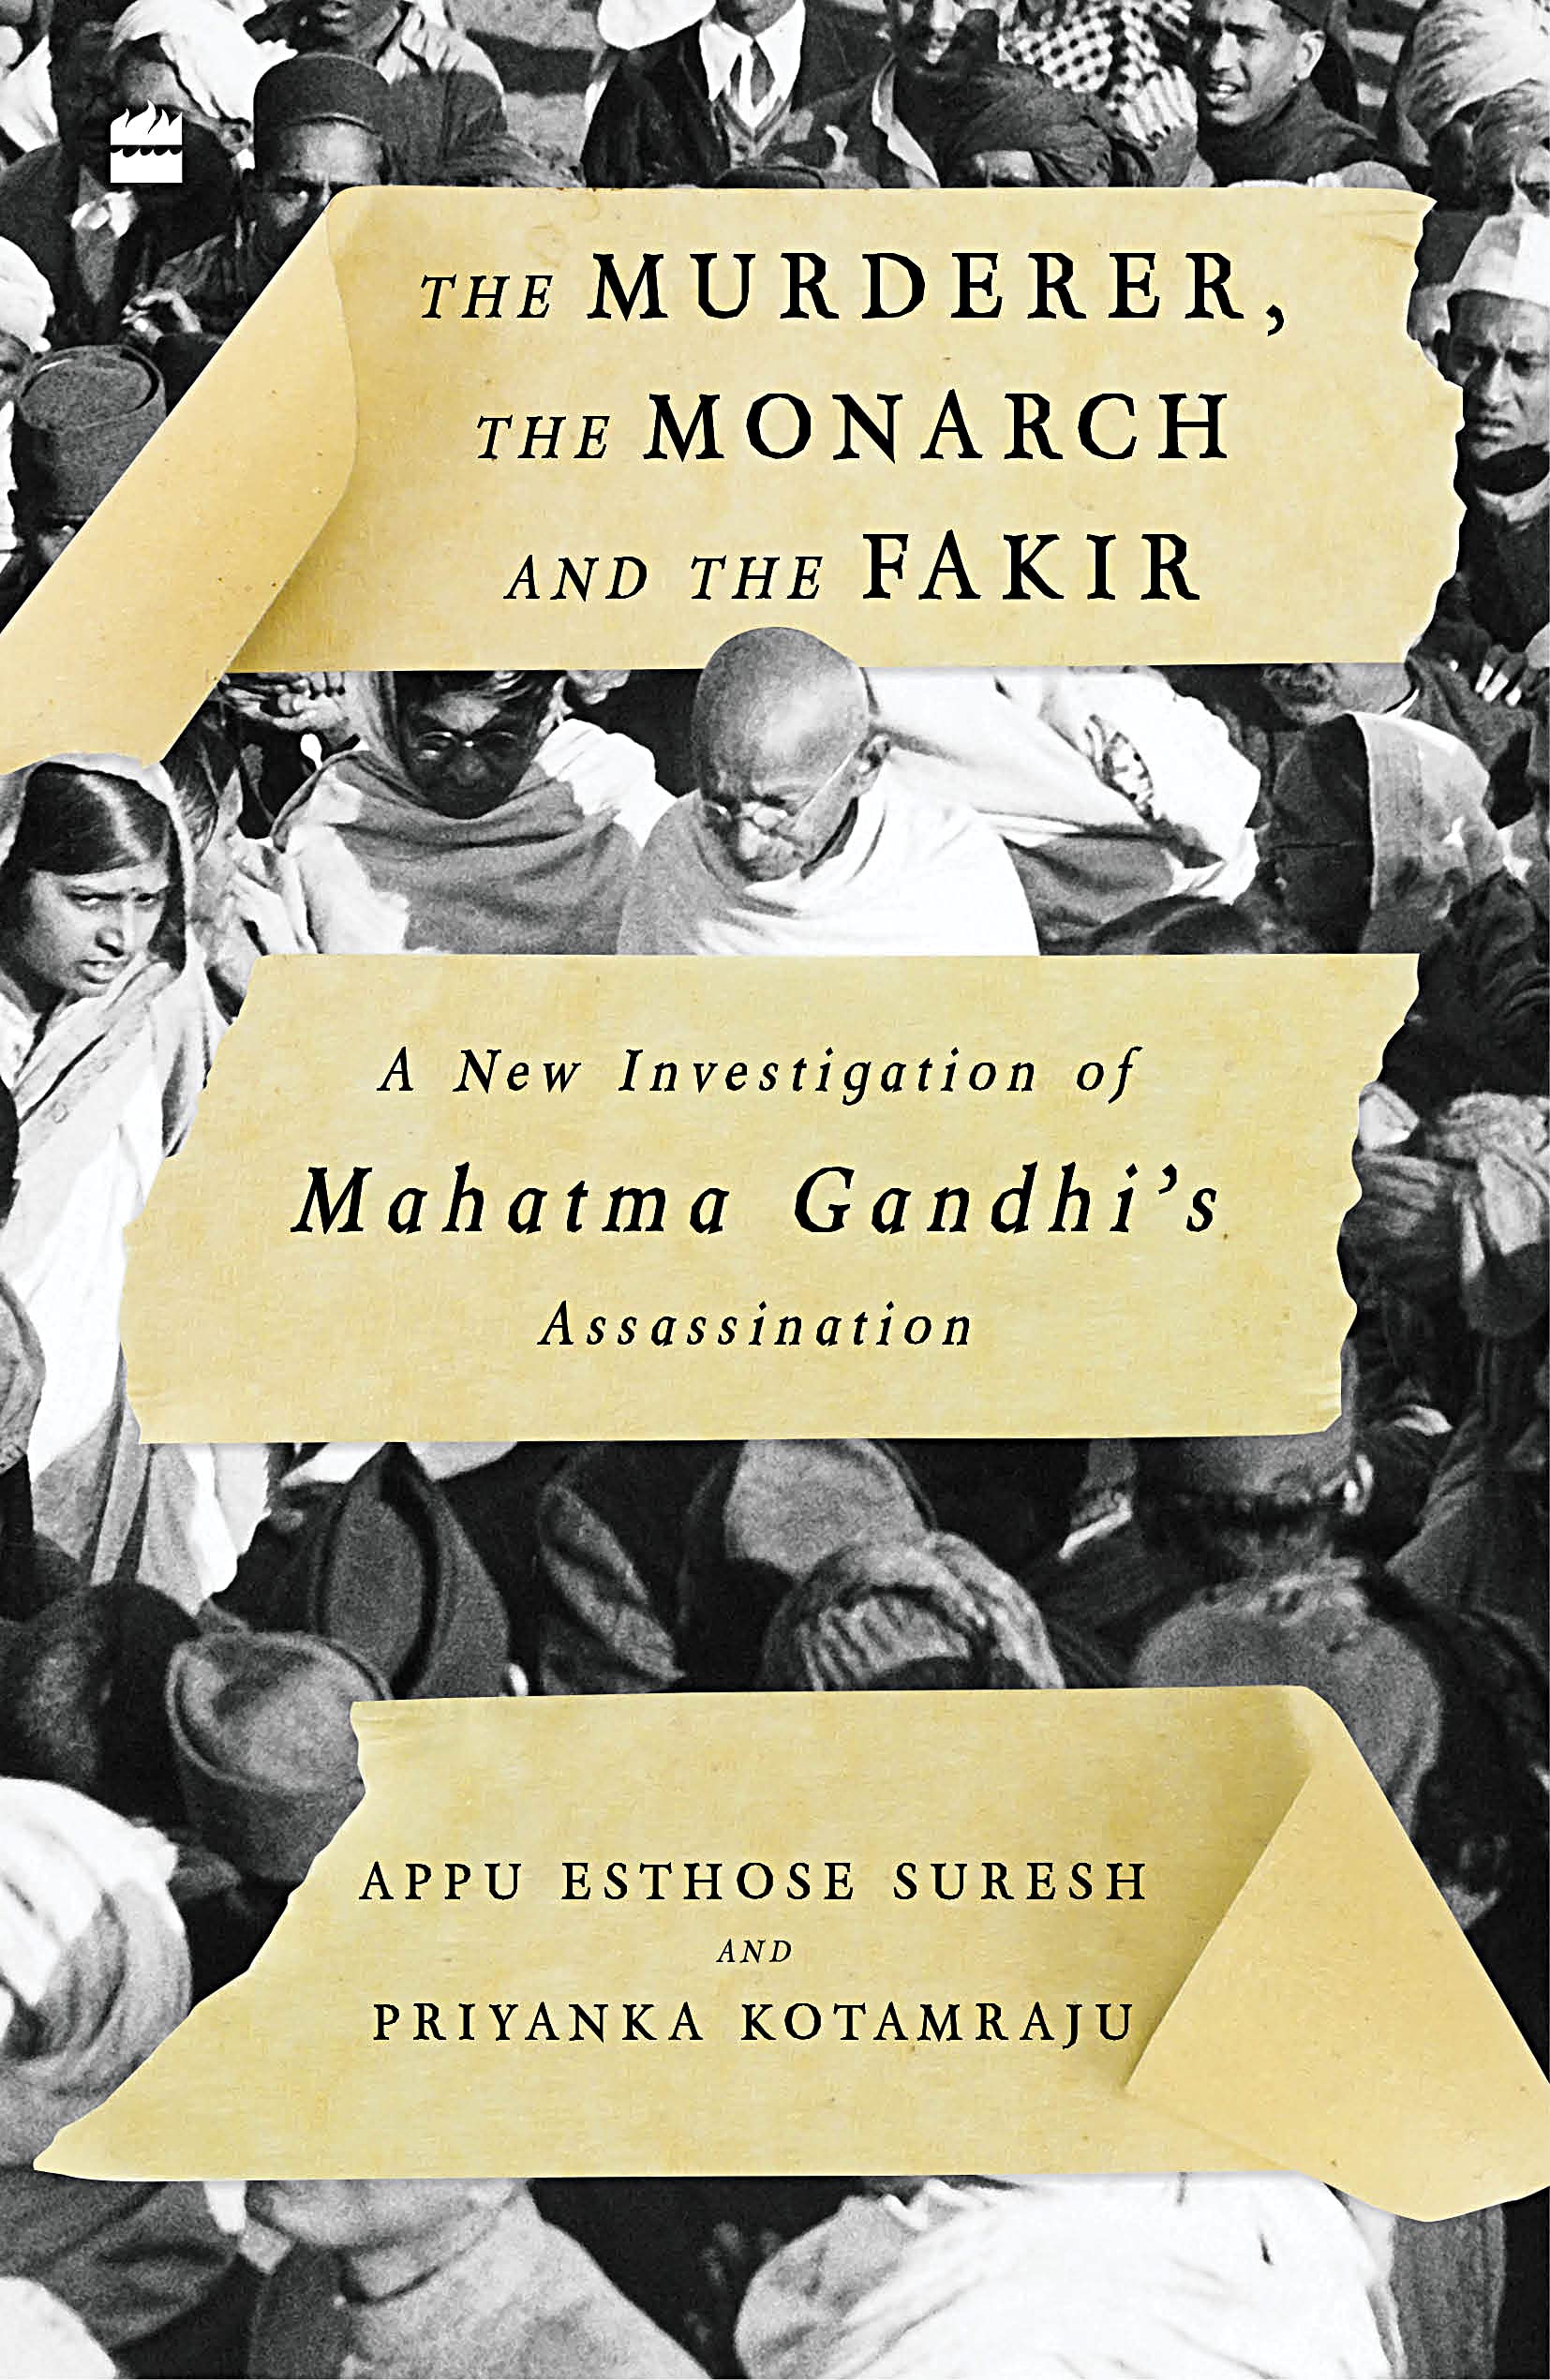 Murderer, The Monarch and The Fakir